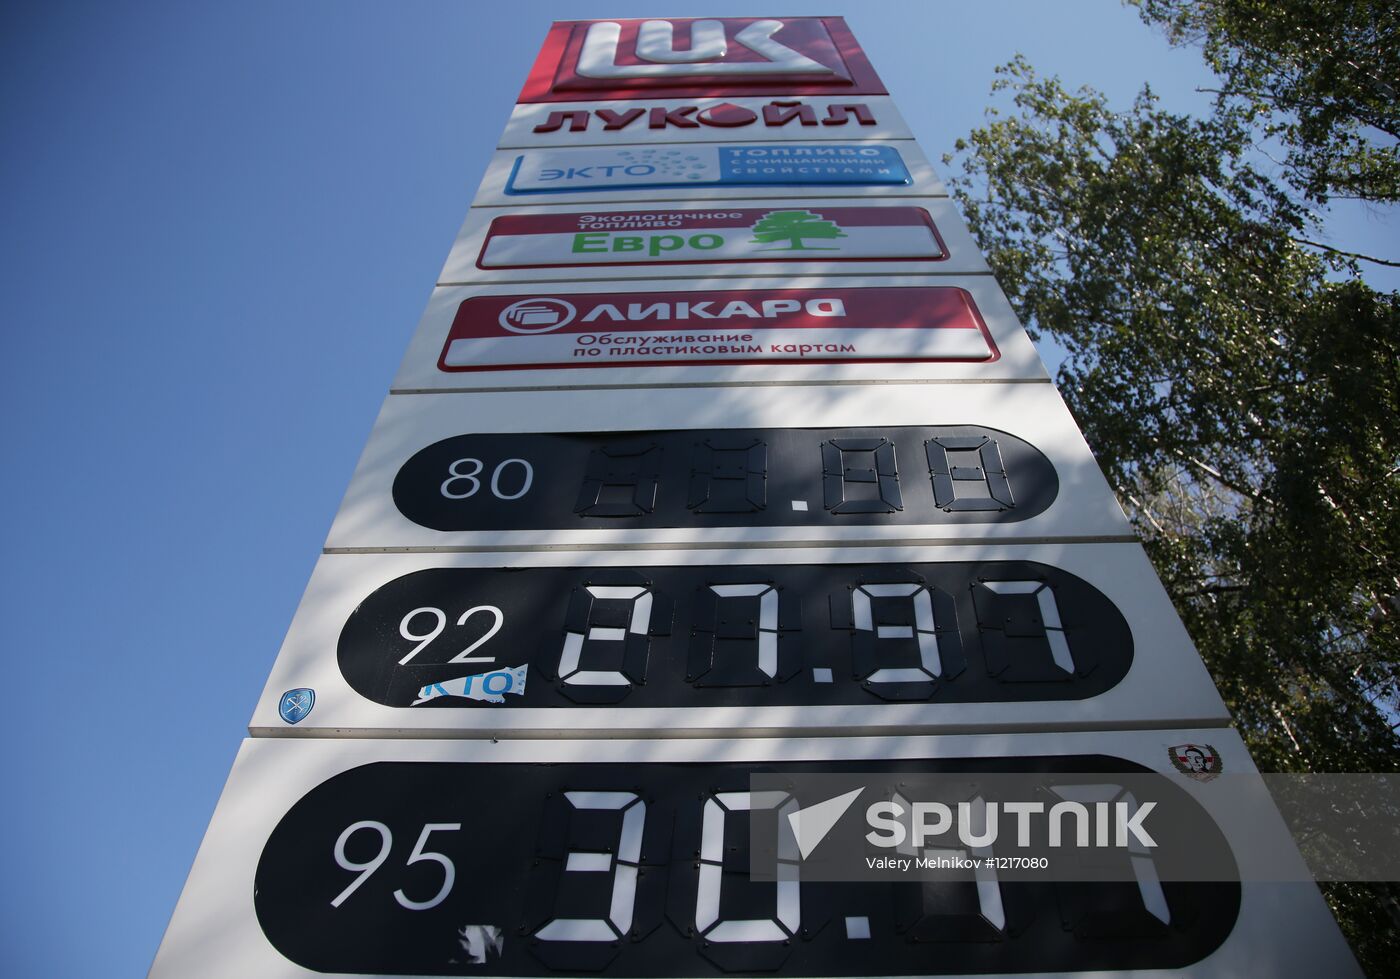 LUKoil gas station in Moscow